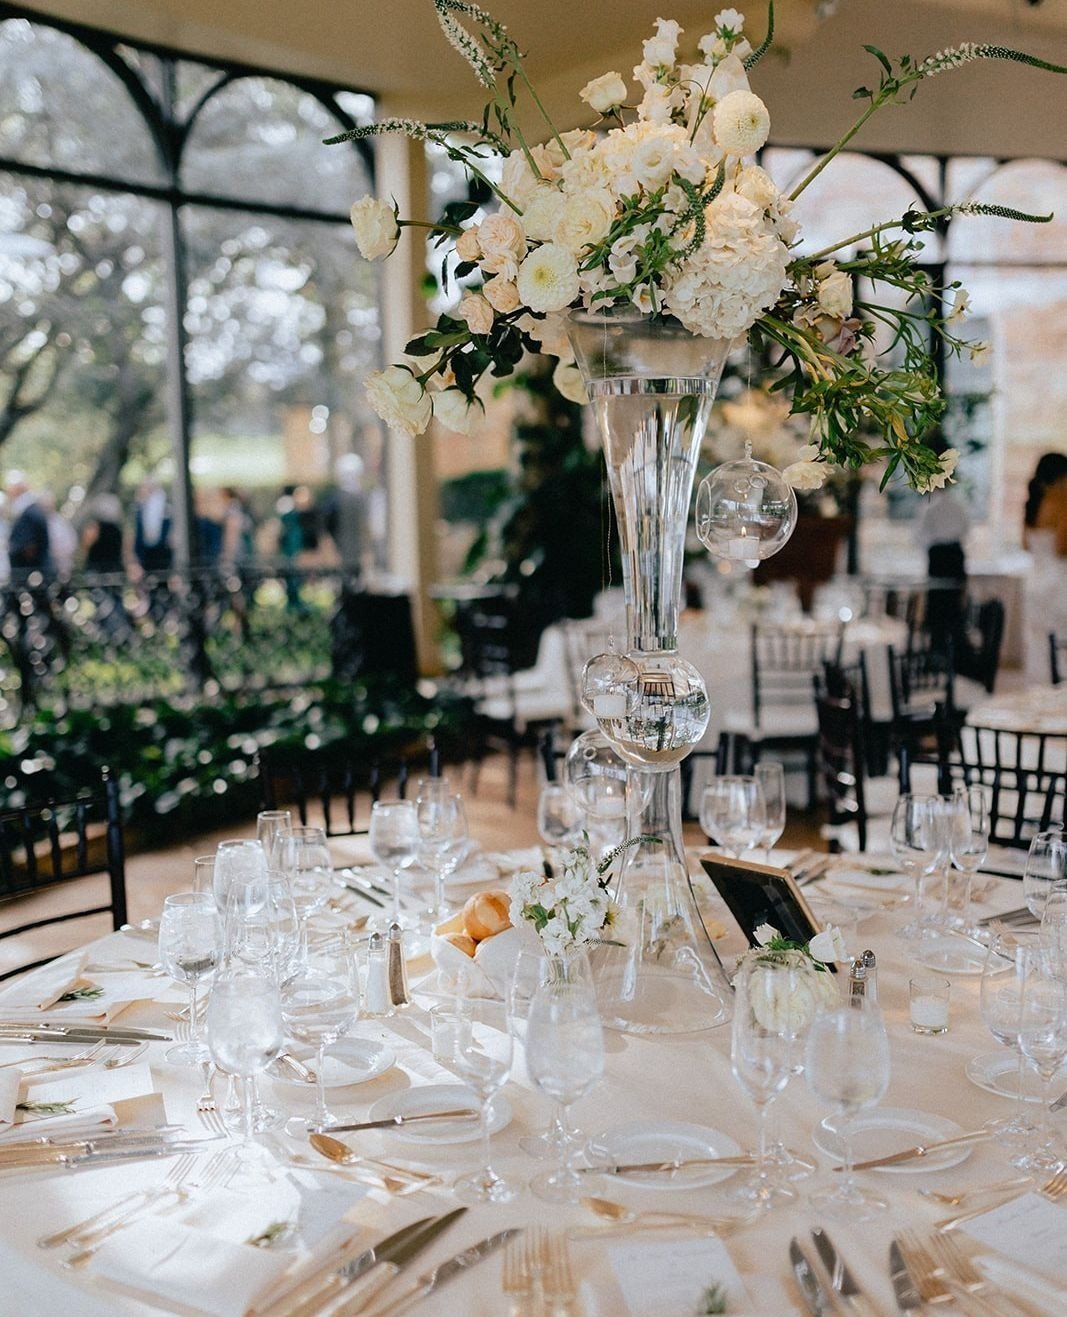 White goes with everything. So, when in doubt, a little classic + tradition stands the test of time! ⁠
⁠
Coordination | @aniwolff_⁠
Clients | @cltrank @powusu2⁠
Venue |  @tpcjasnapolanaweddings⁠
Florals | @lauraclaredesign⁠
Photography &amp; Videogra